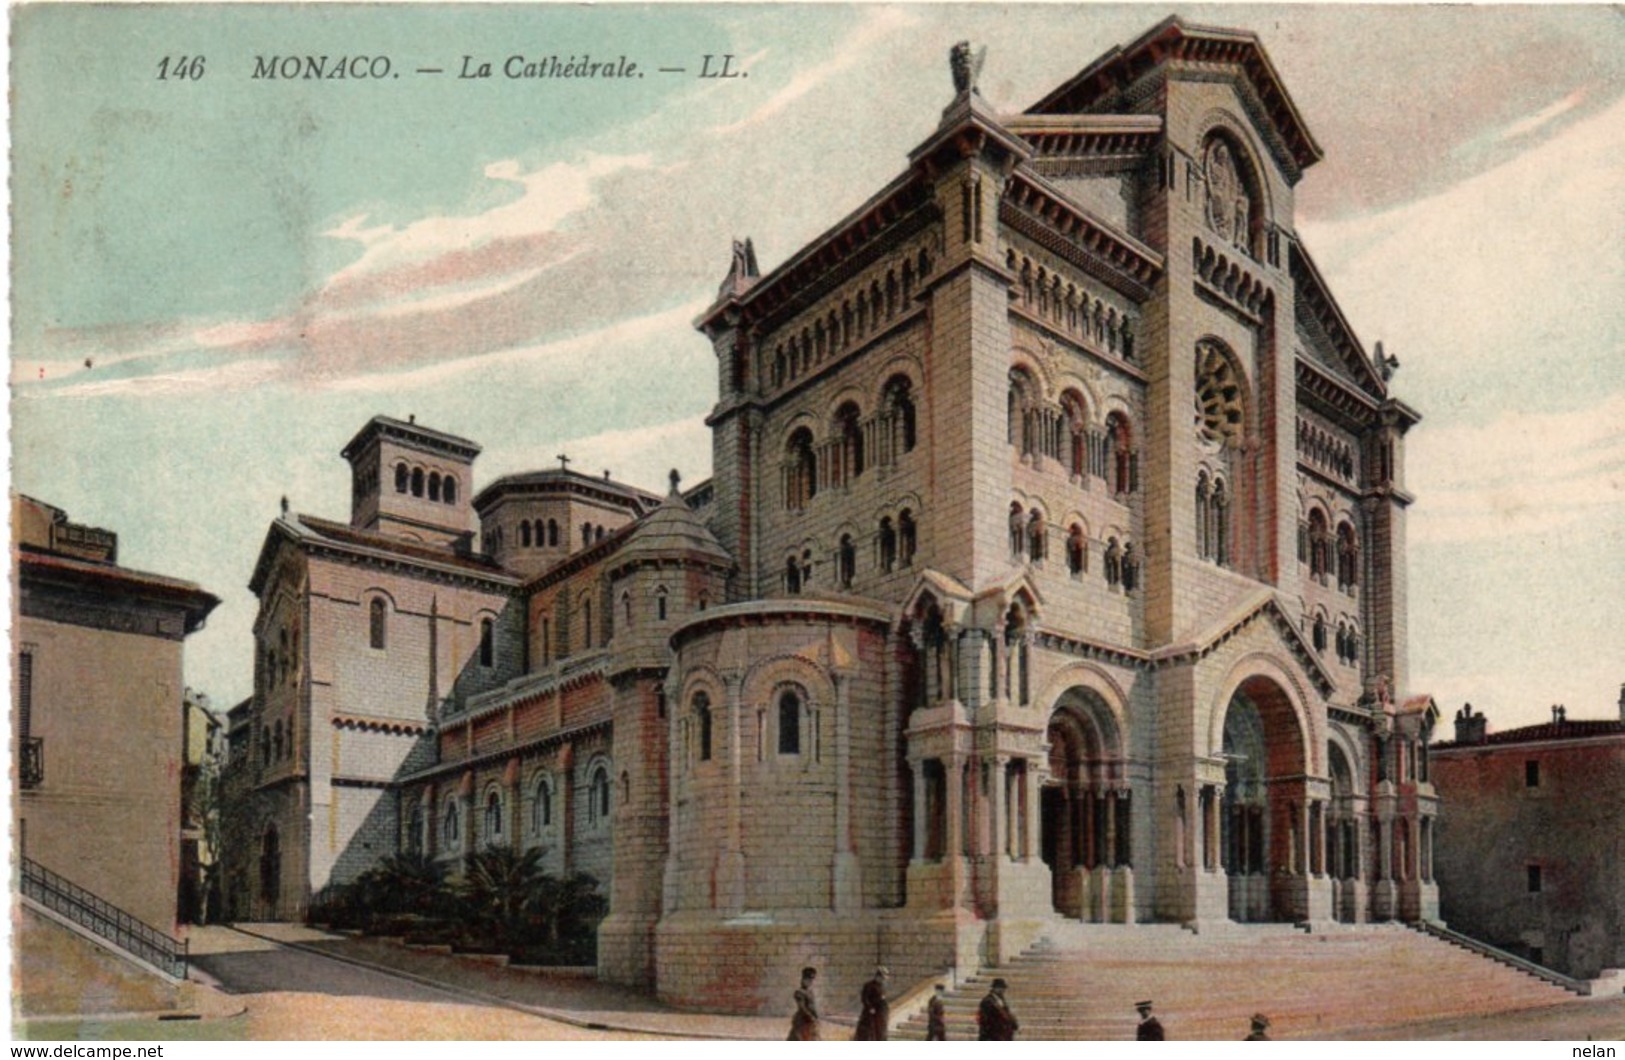 MONACO-LE CATHEDRALE-1910 - Kathedrale Notre-Dame-Immaculée